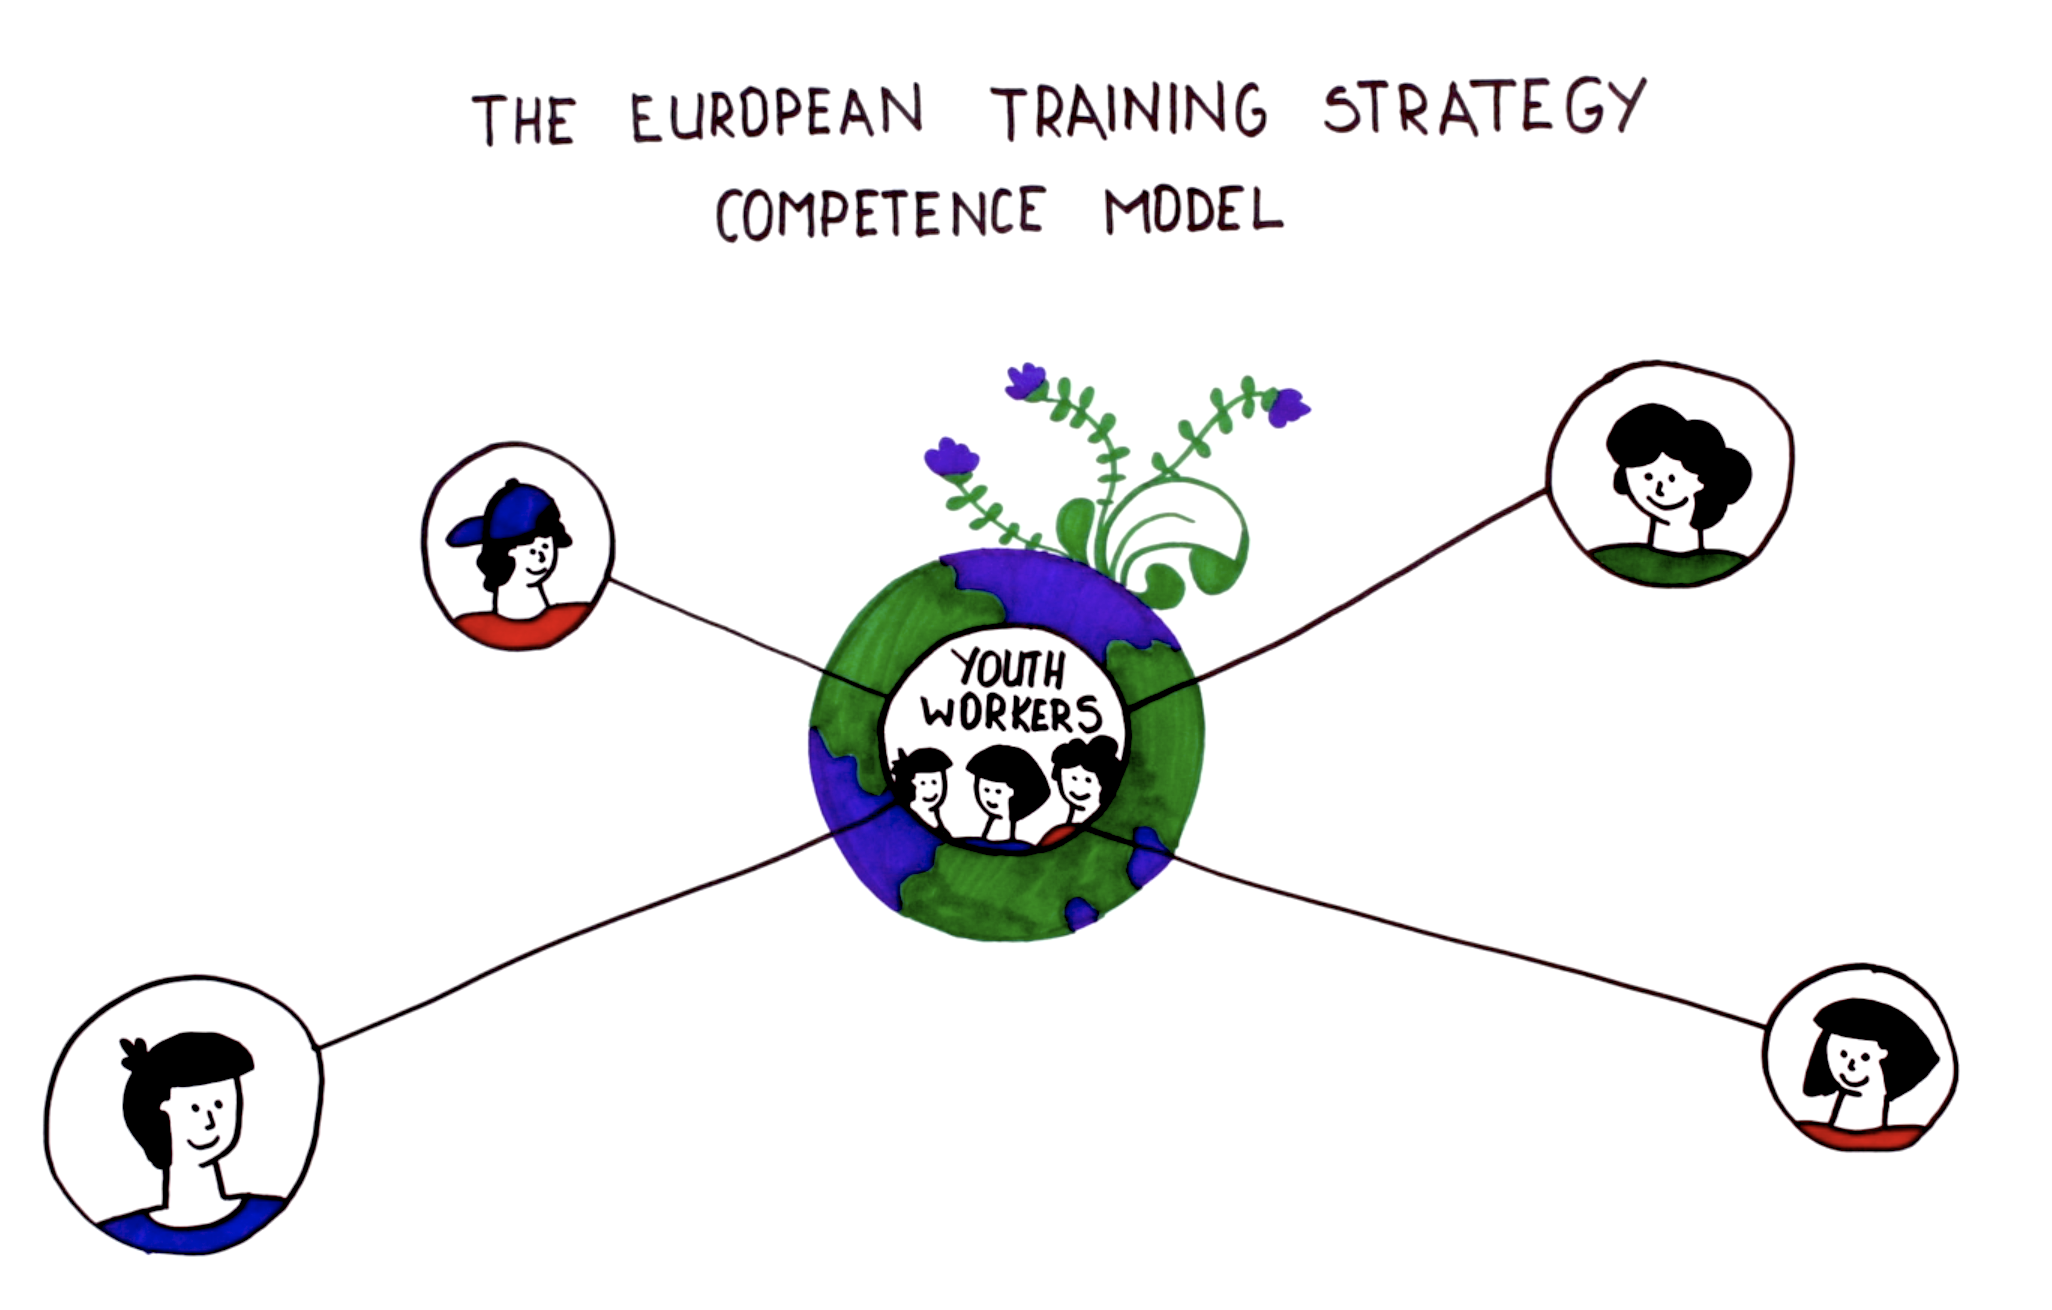 Why the ETS competence model?